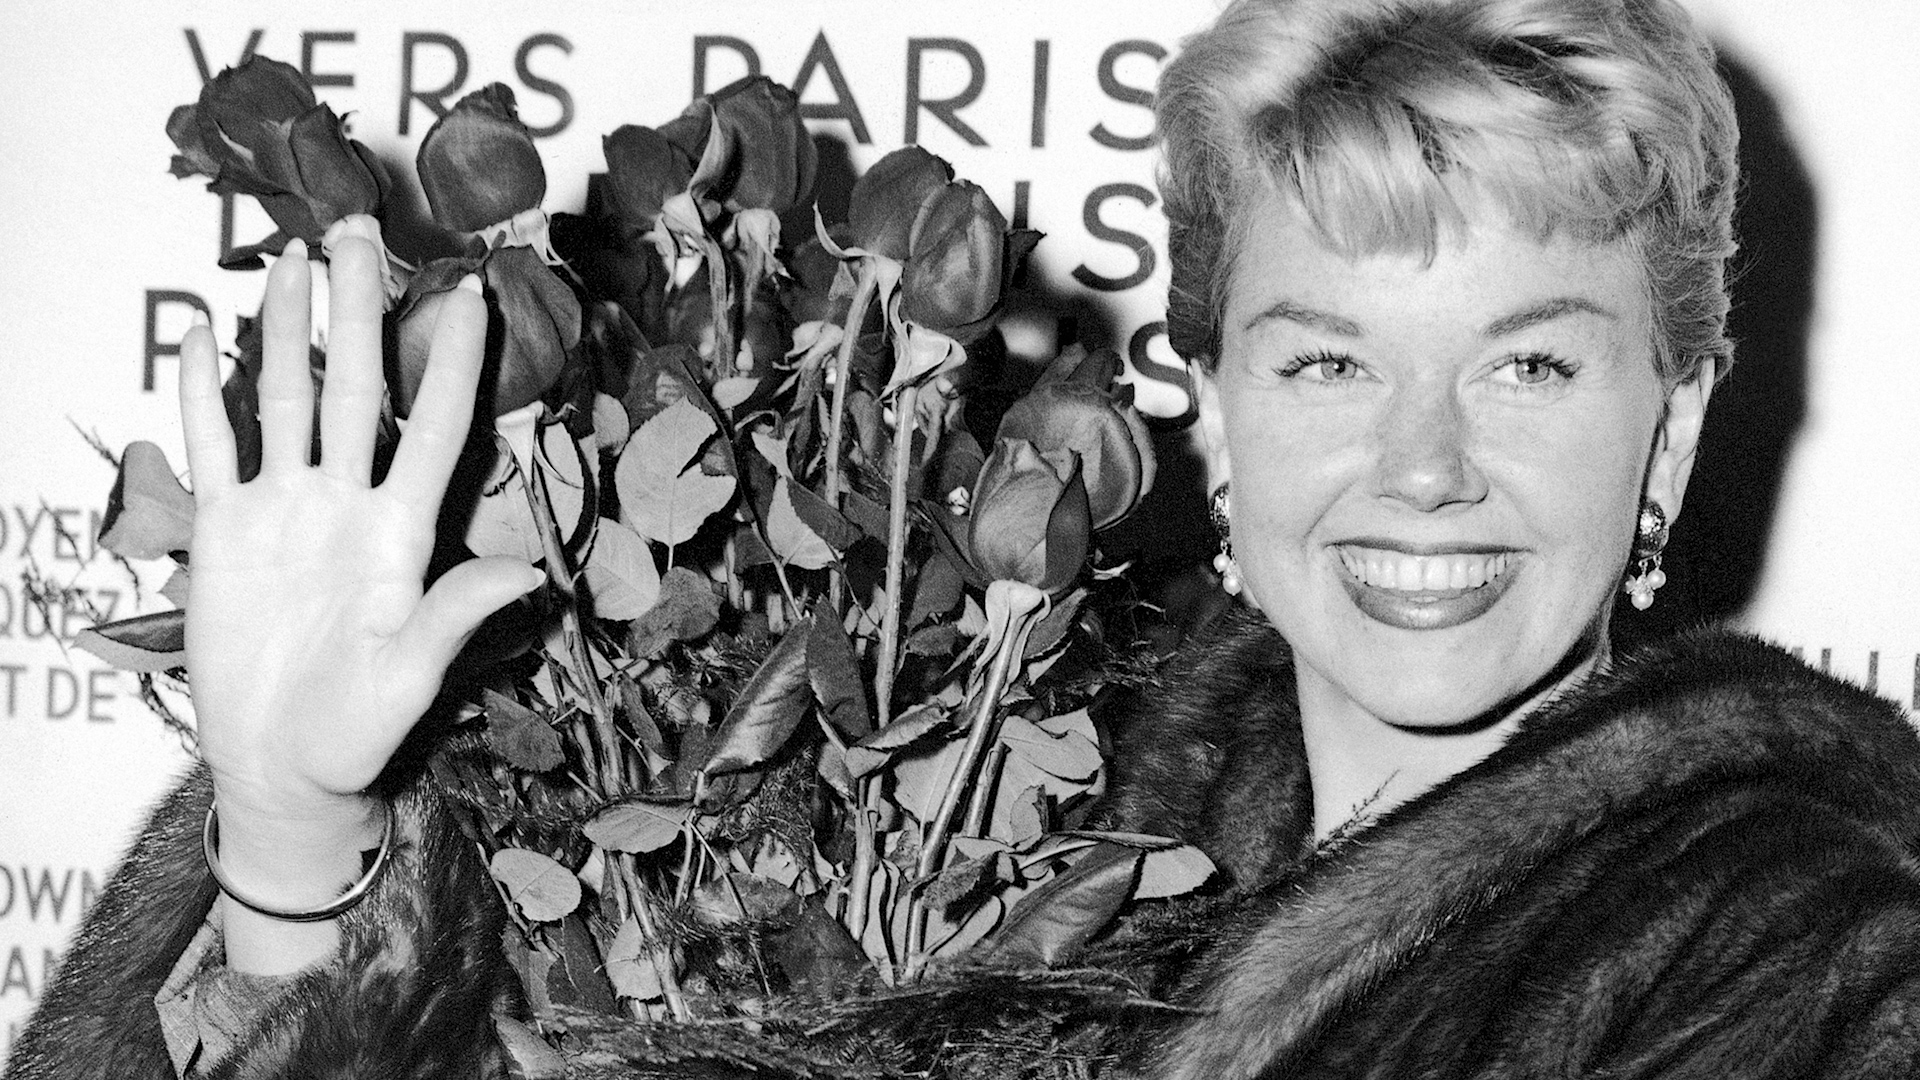 1950s Interracial Porn - Doris Day, singer and perpetually chaste movie star of the 1950s and '60s,  dies at 97 - The Washington Post